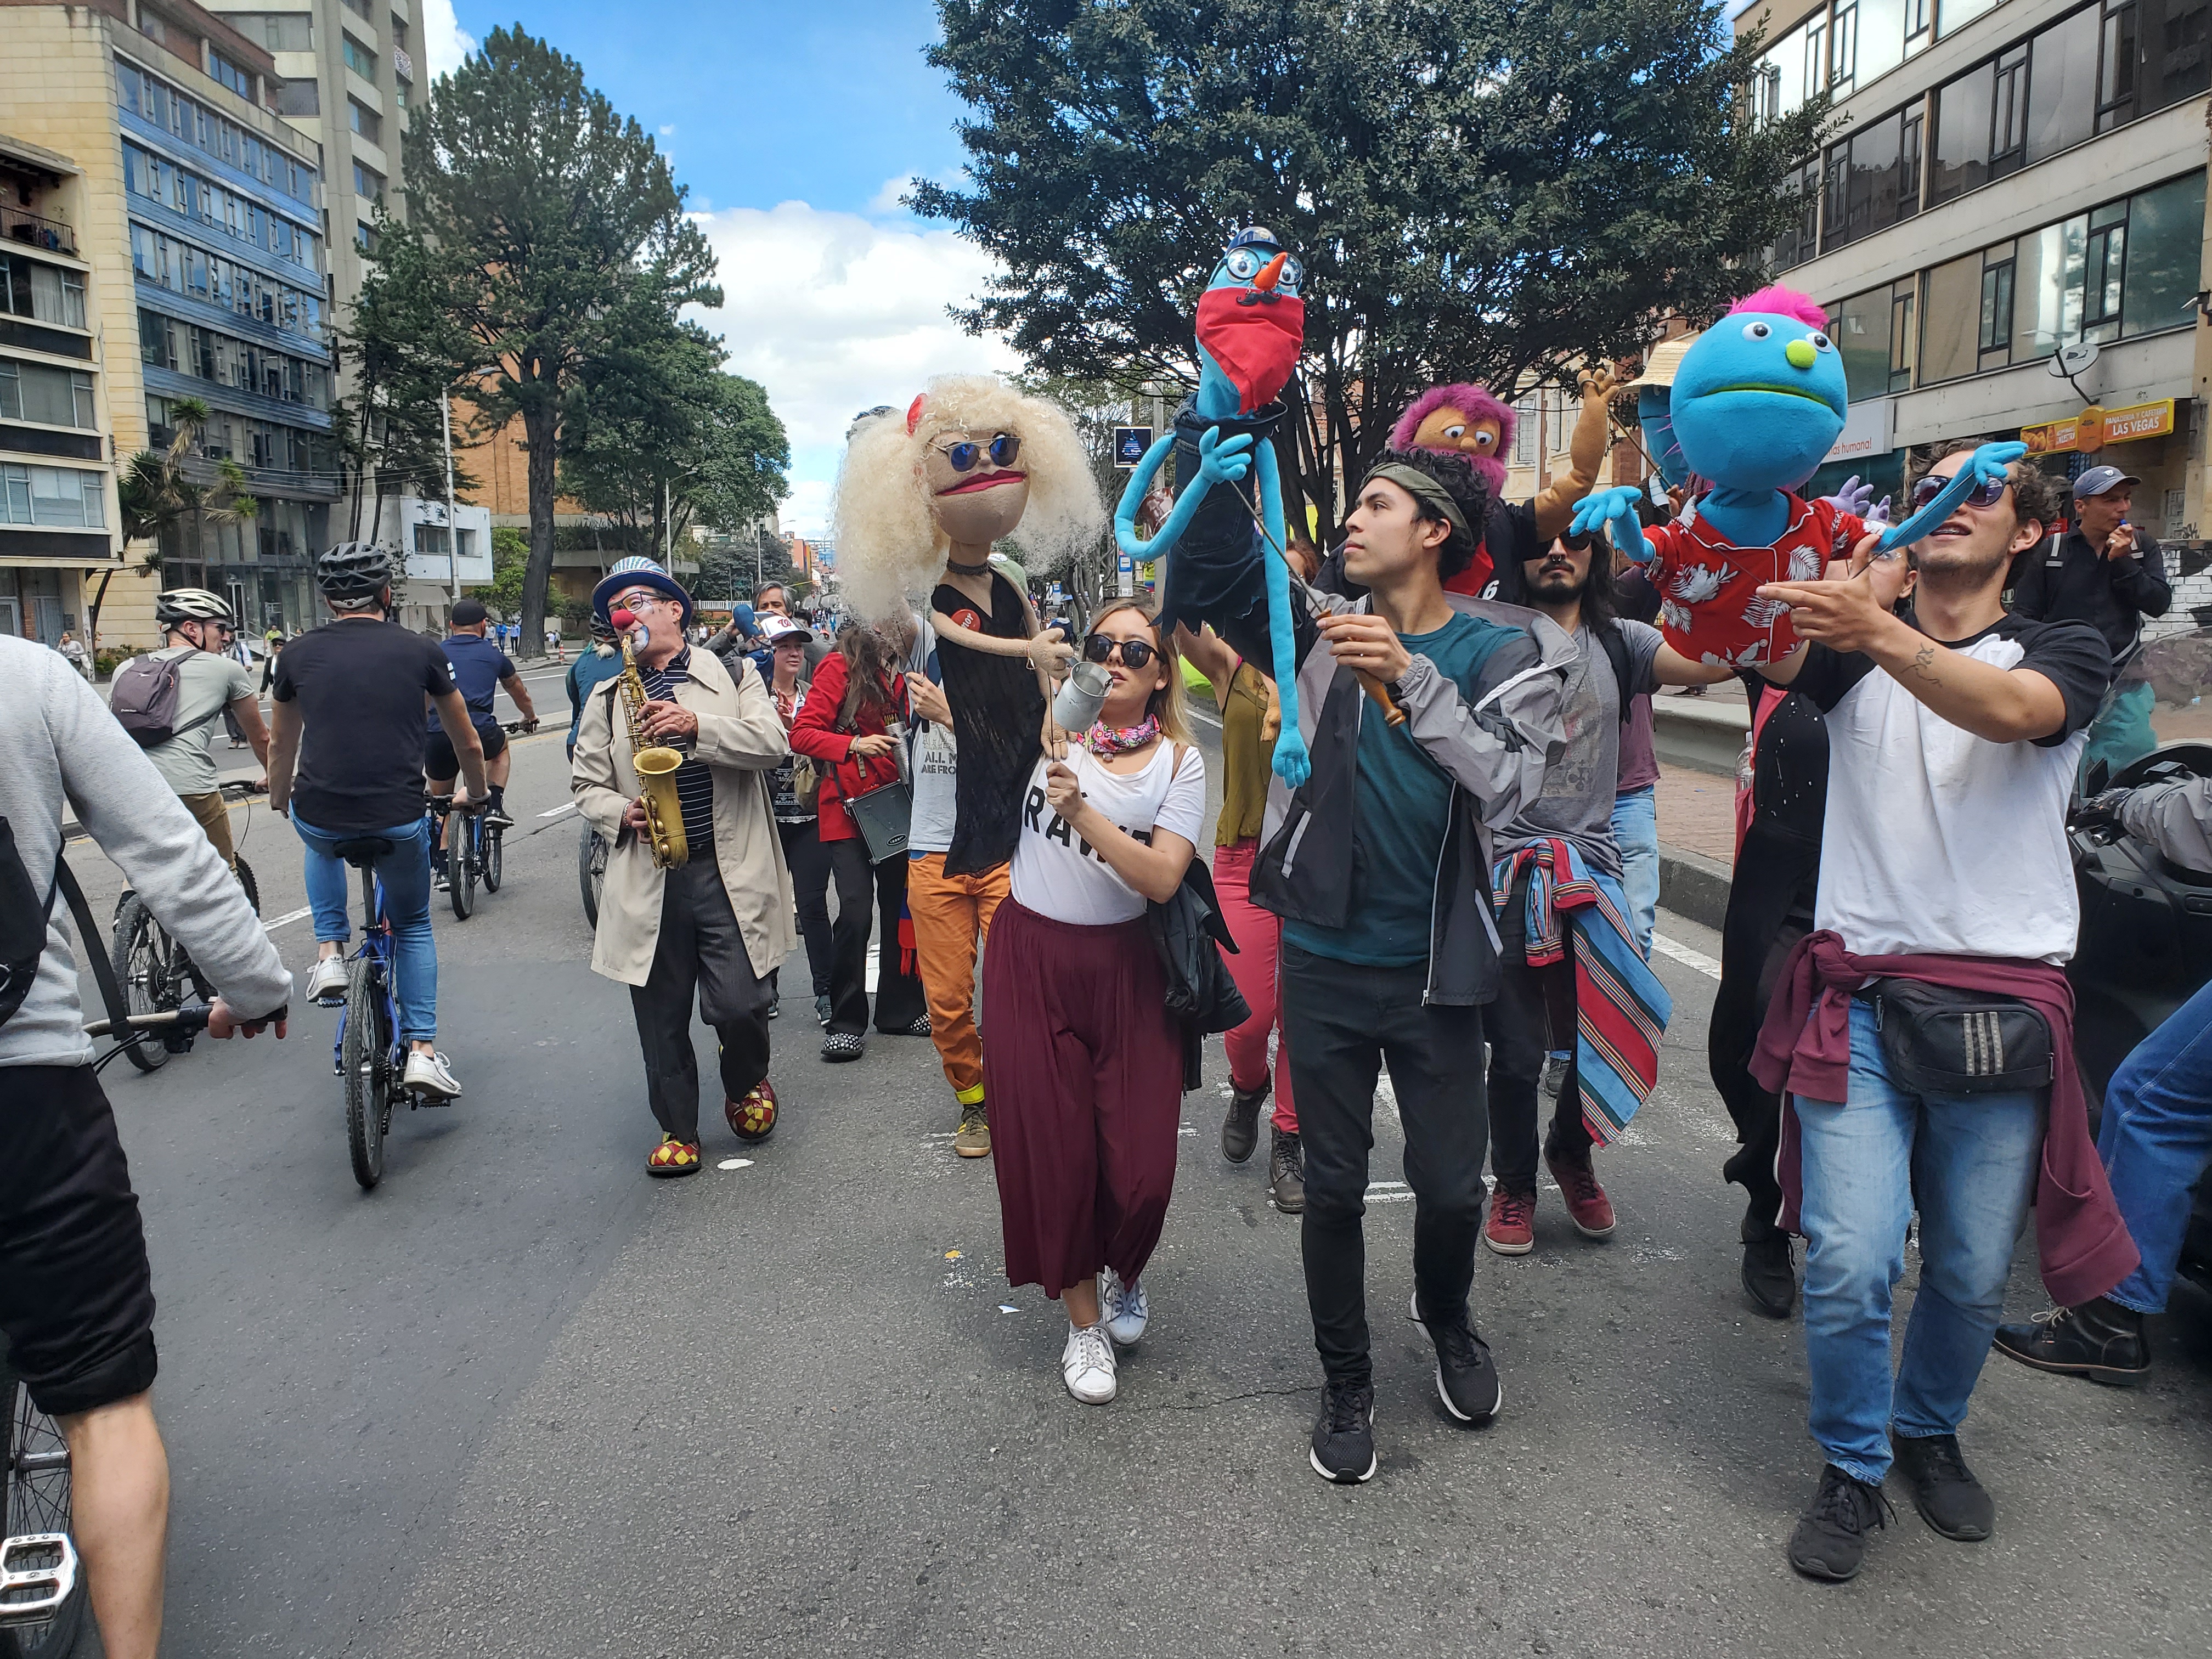 In December 2019, our cycling tour was met with some street protests - all of which were peaceful